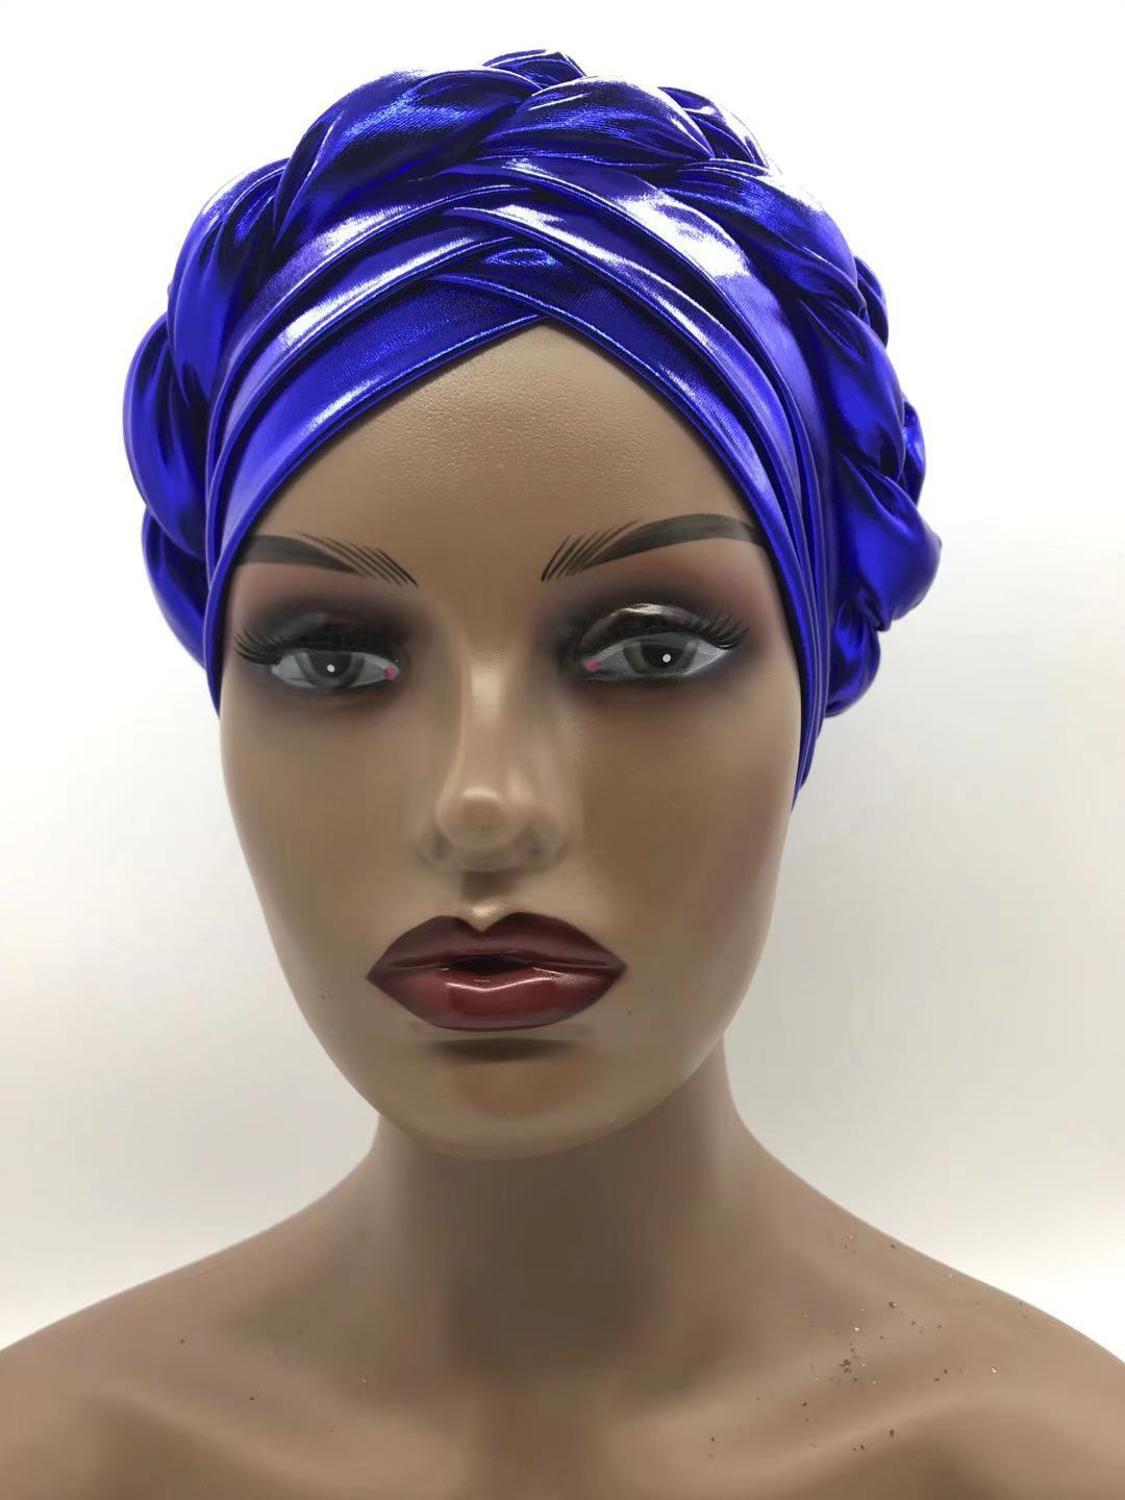 Forehead Braids Turban Cap Shimmering African Headtie, Head Wraps, Muslim Headscarf, and Bonnet Ready Hijab Hat - Flexi Africa - Flexi Africa offers Free Delivery Worldwide - Vibrant African traditional clothing showcasing bold prints and intricate designs